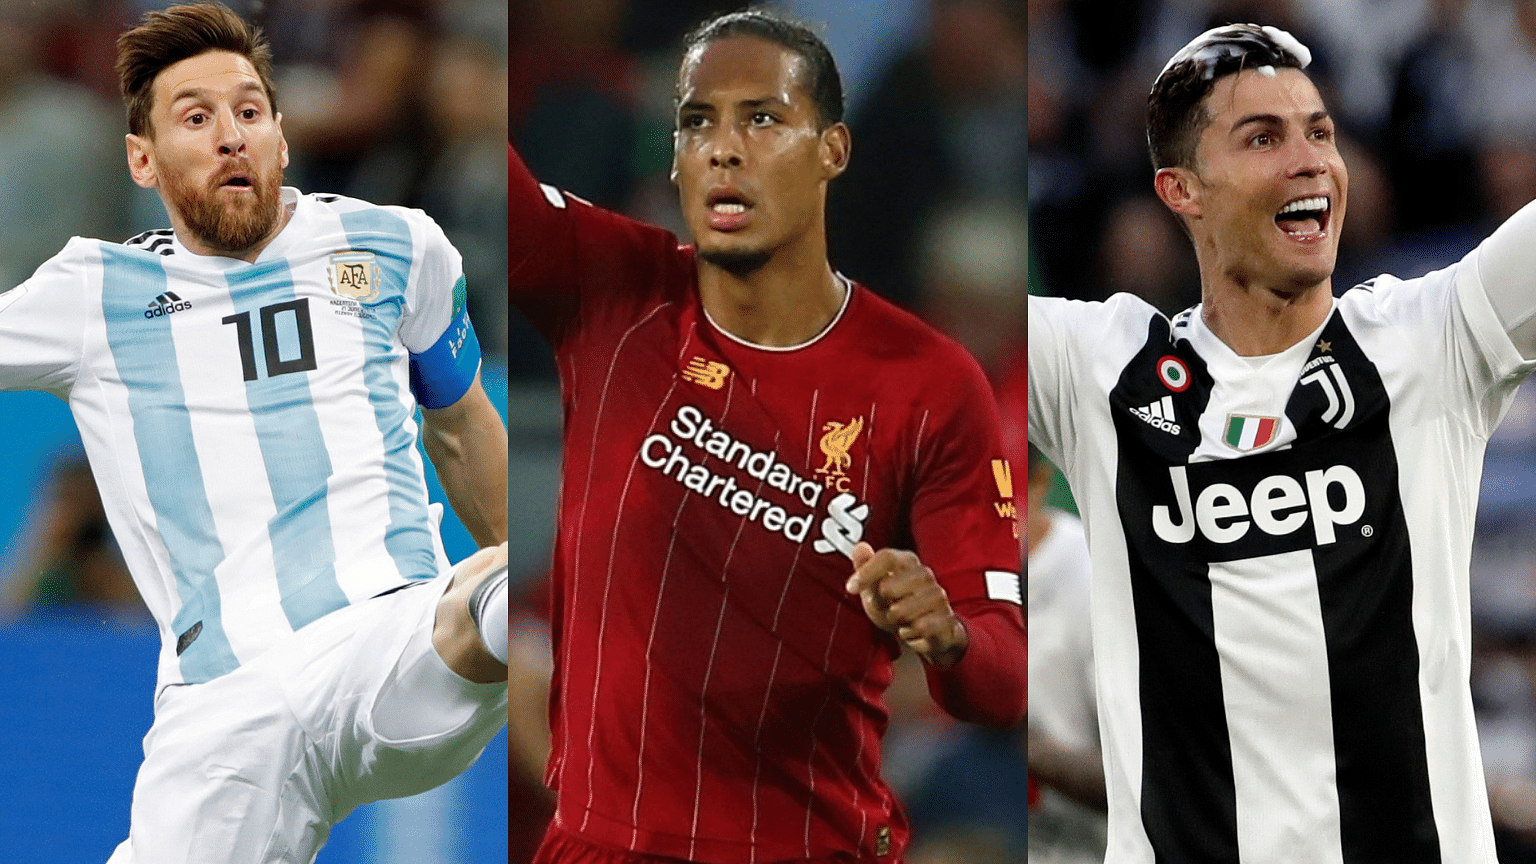 Netherlands defender Virgil van Dijk has joined five-time winners Cristiano Ronaldo and Lionel Messi as the three finalists for the FIFA best player award.